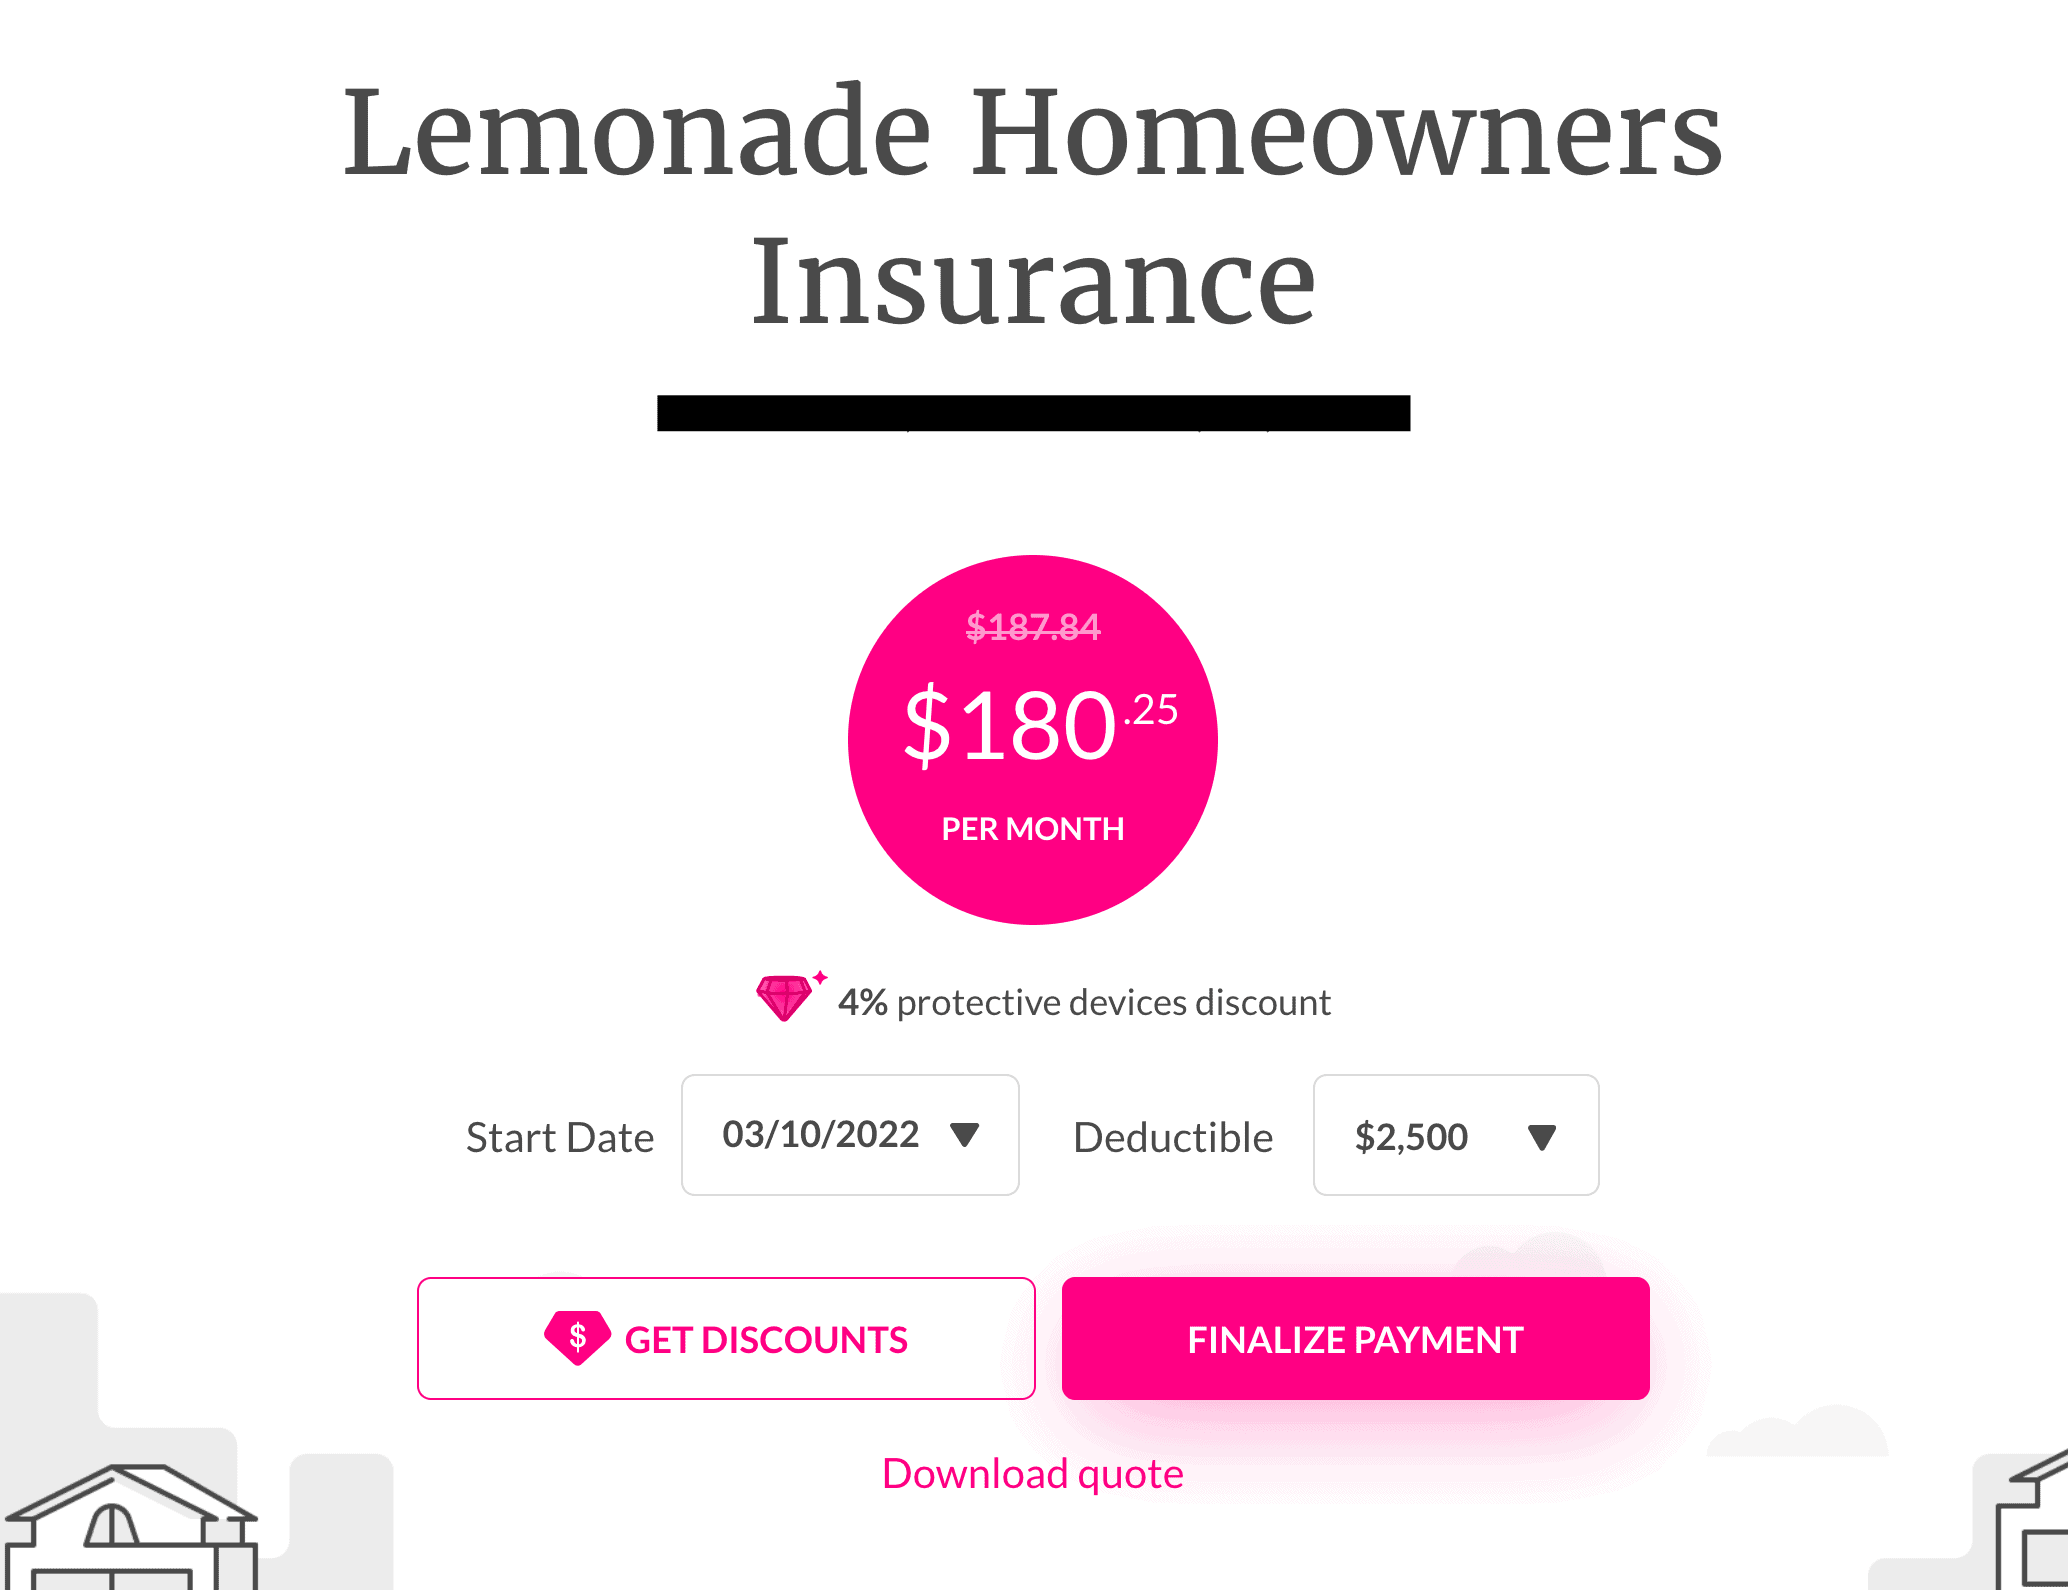 My test home insurance rate ($180.25 per month) matches the reconstruction costs I gave Lemonade. Yours may be different.